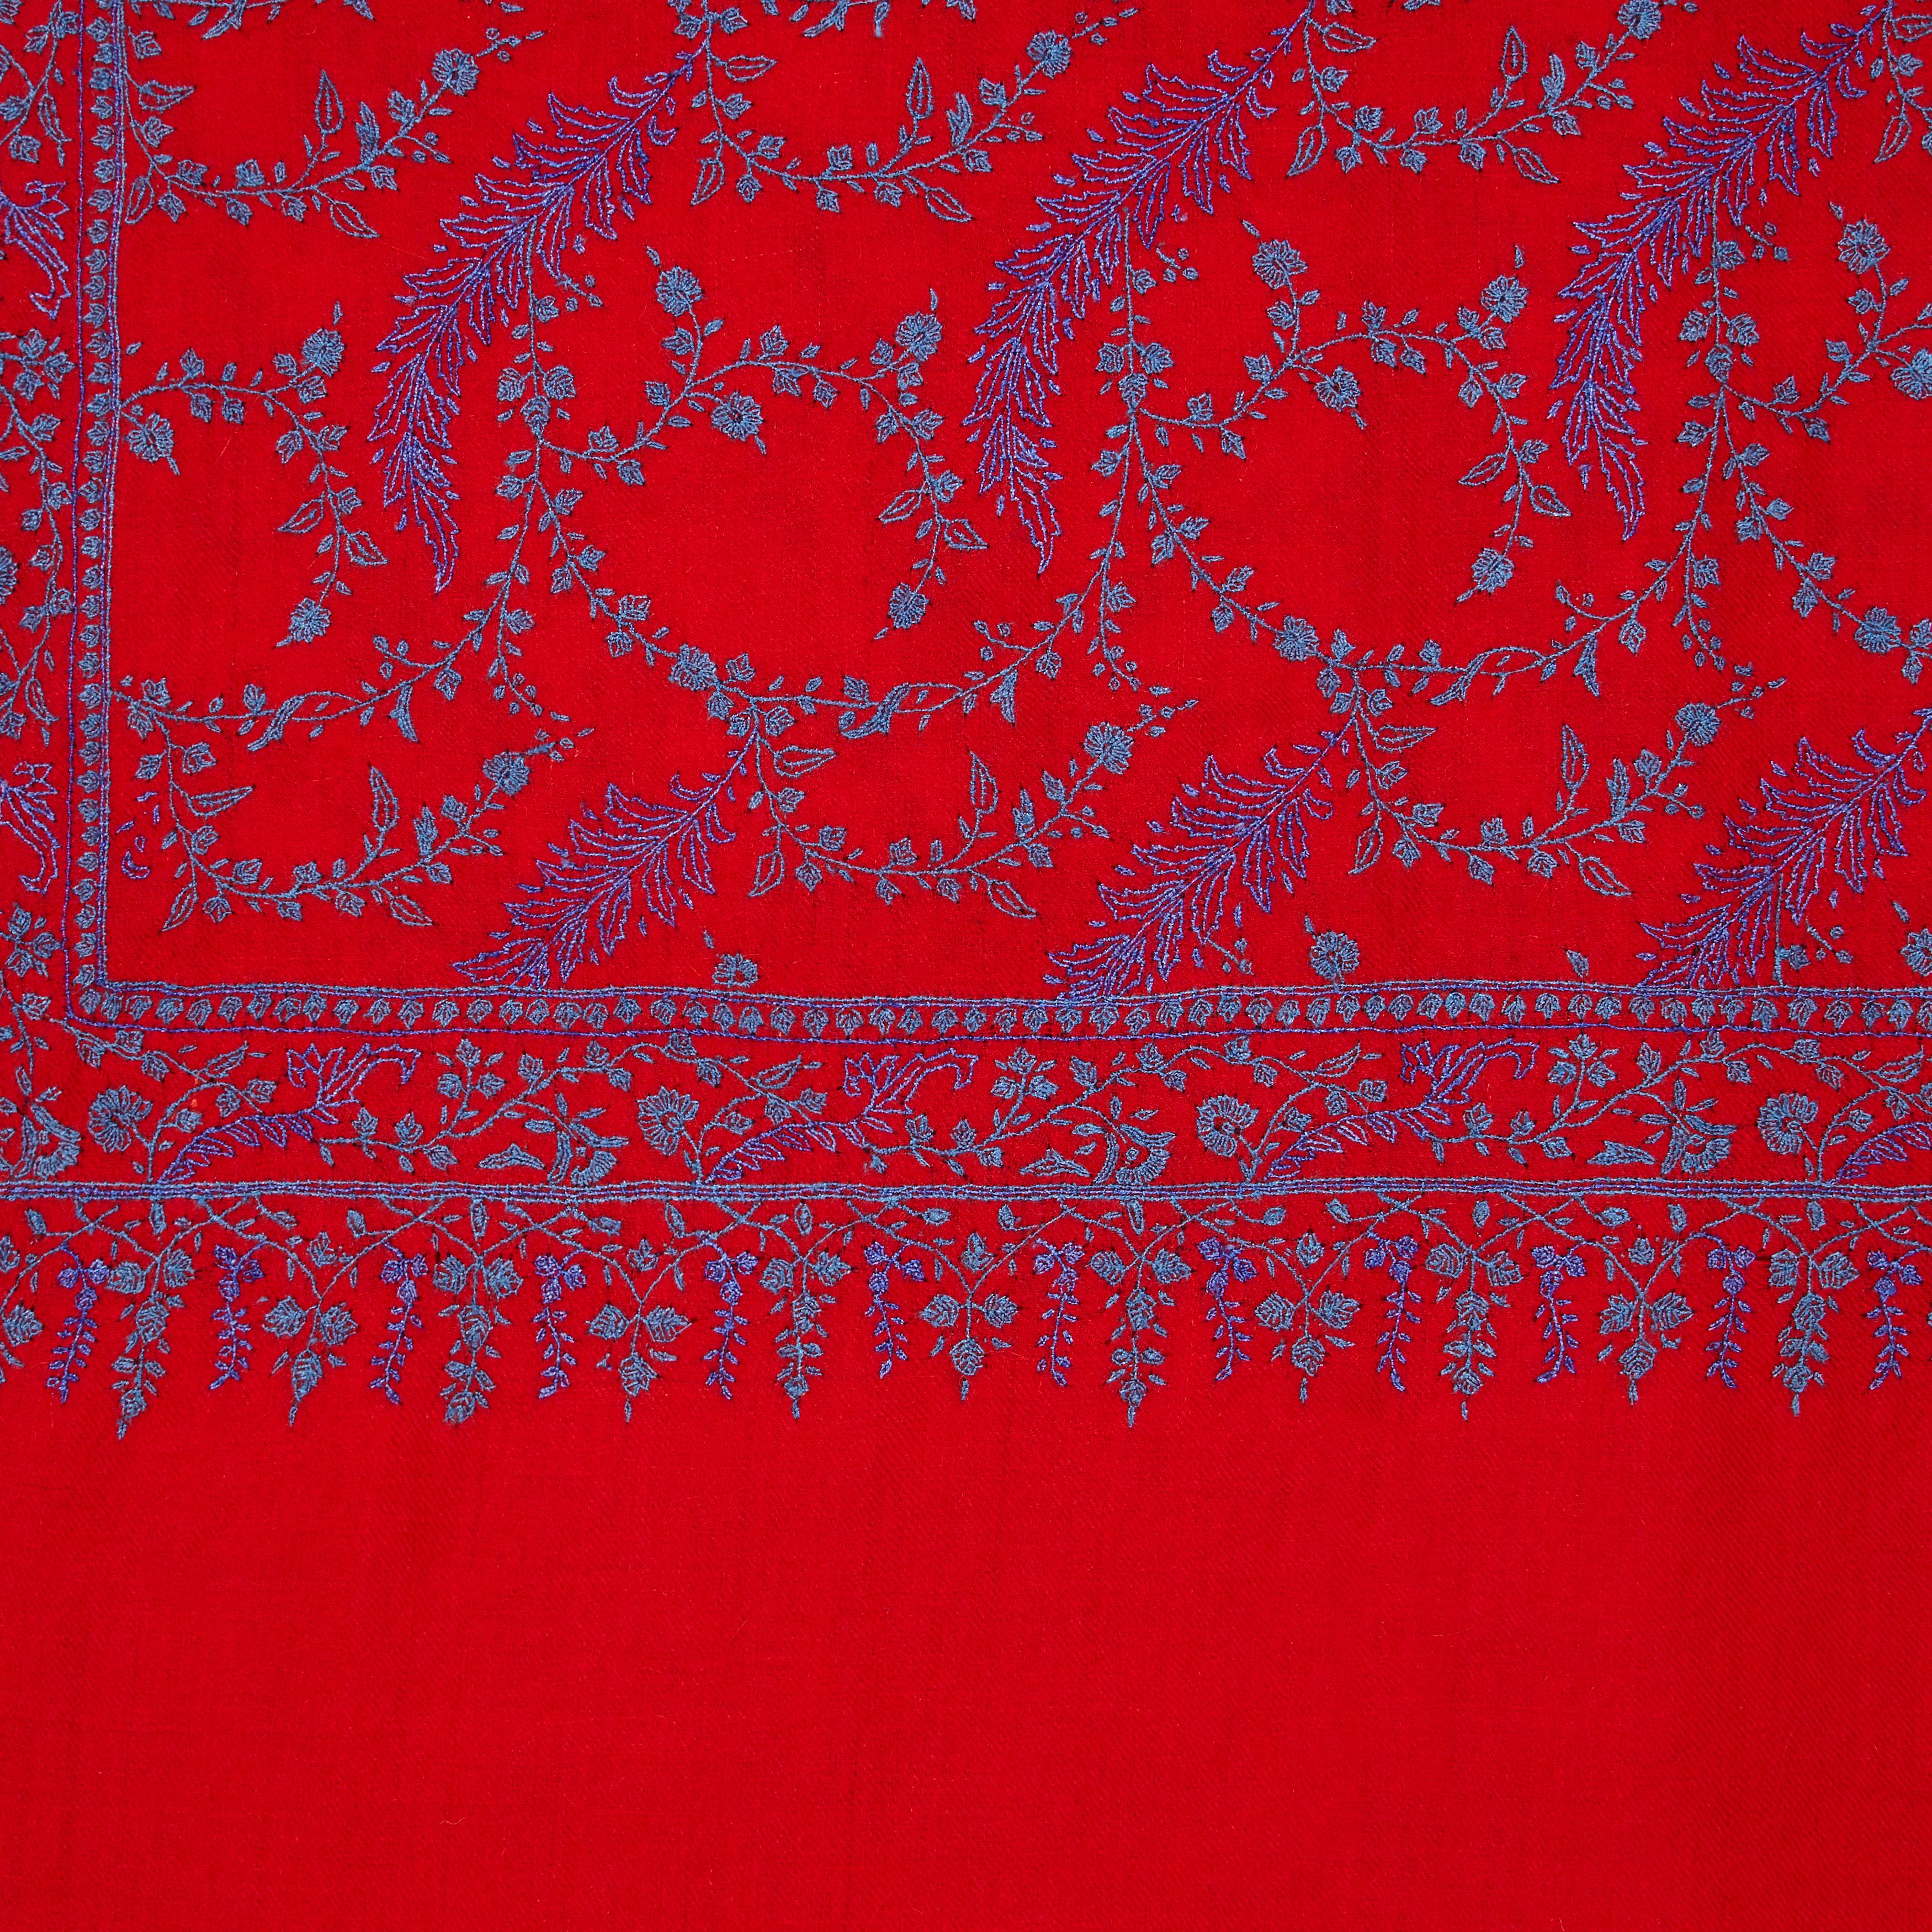 High Quality Hand Embroidered 100% Cashmere Shawl in Red & Blue 

The perfect Christmas gift for someone special - this shawl is unique and handmade. 
Verheyen London’s shawl is spun from the finest embroidered woven cashmere from Kashmir.  The